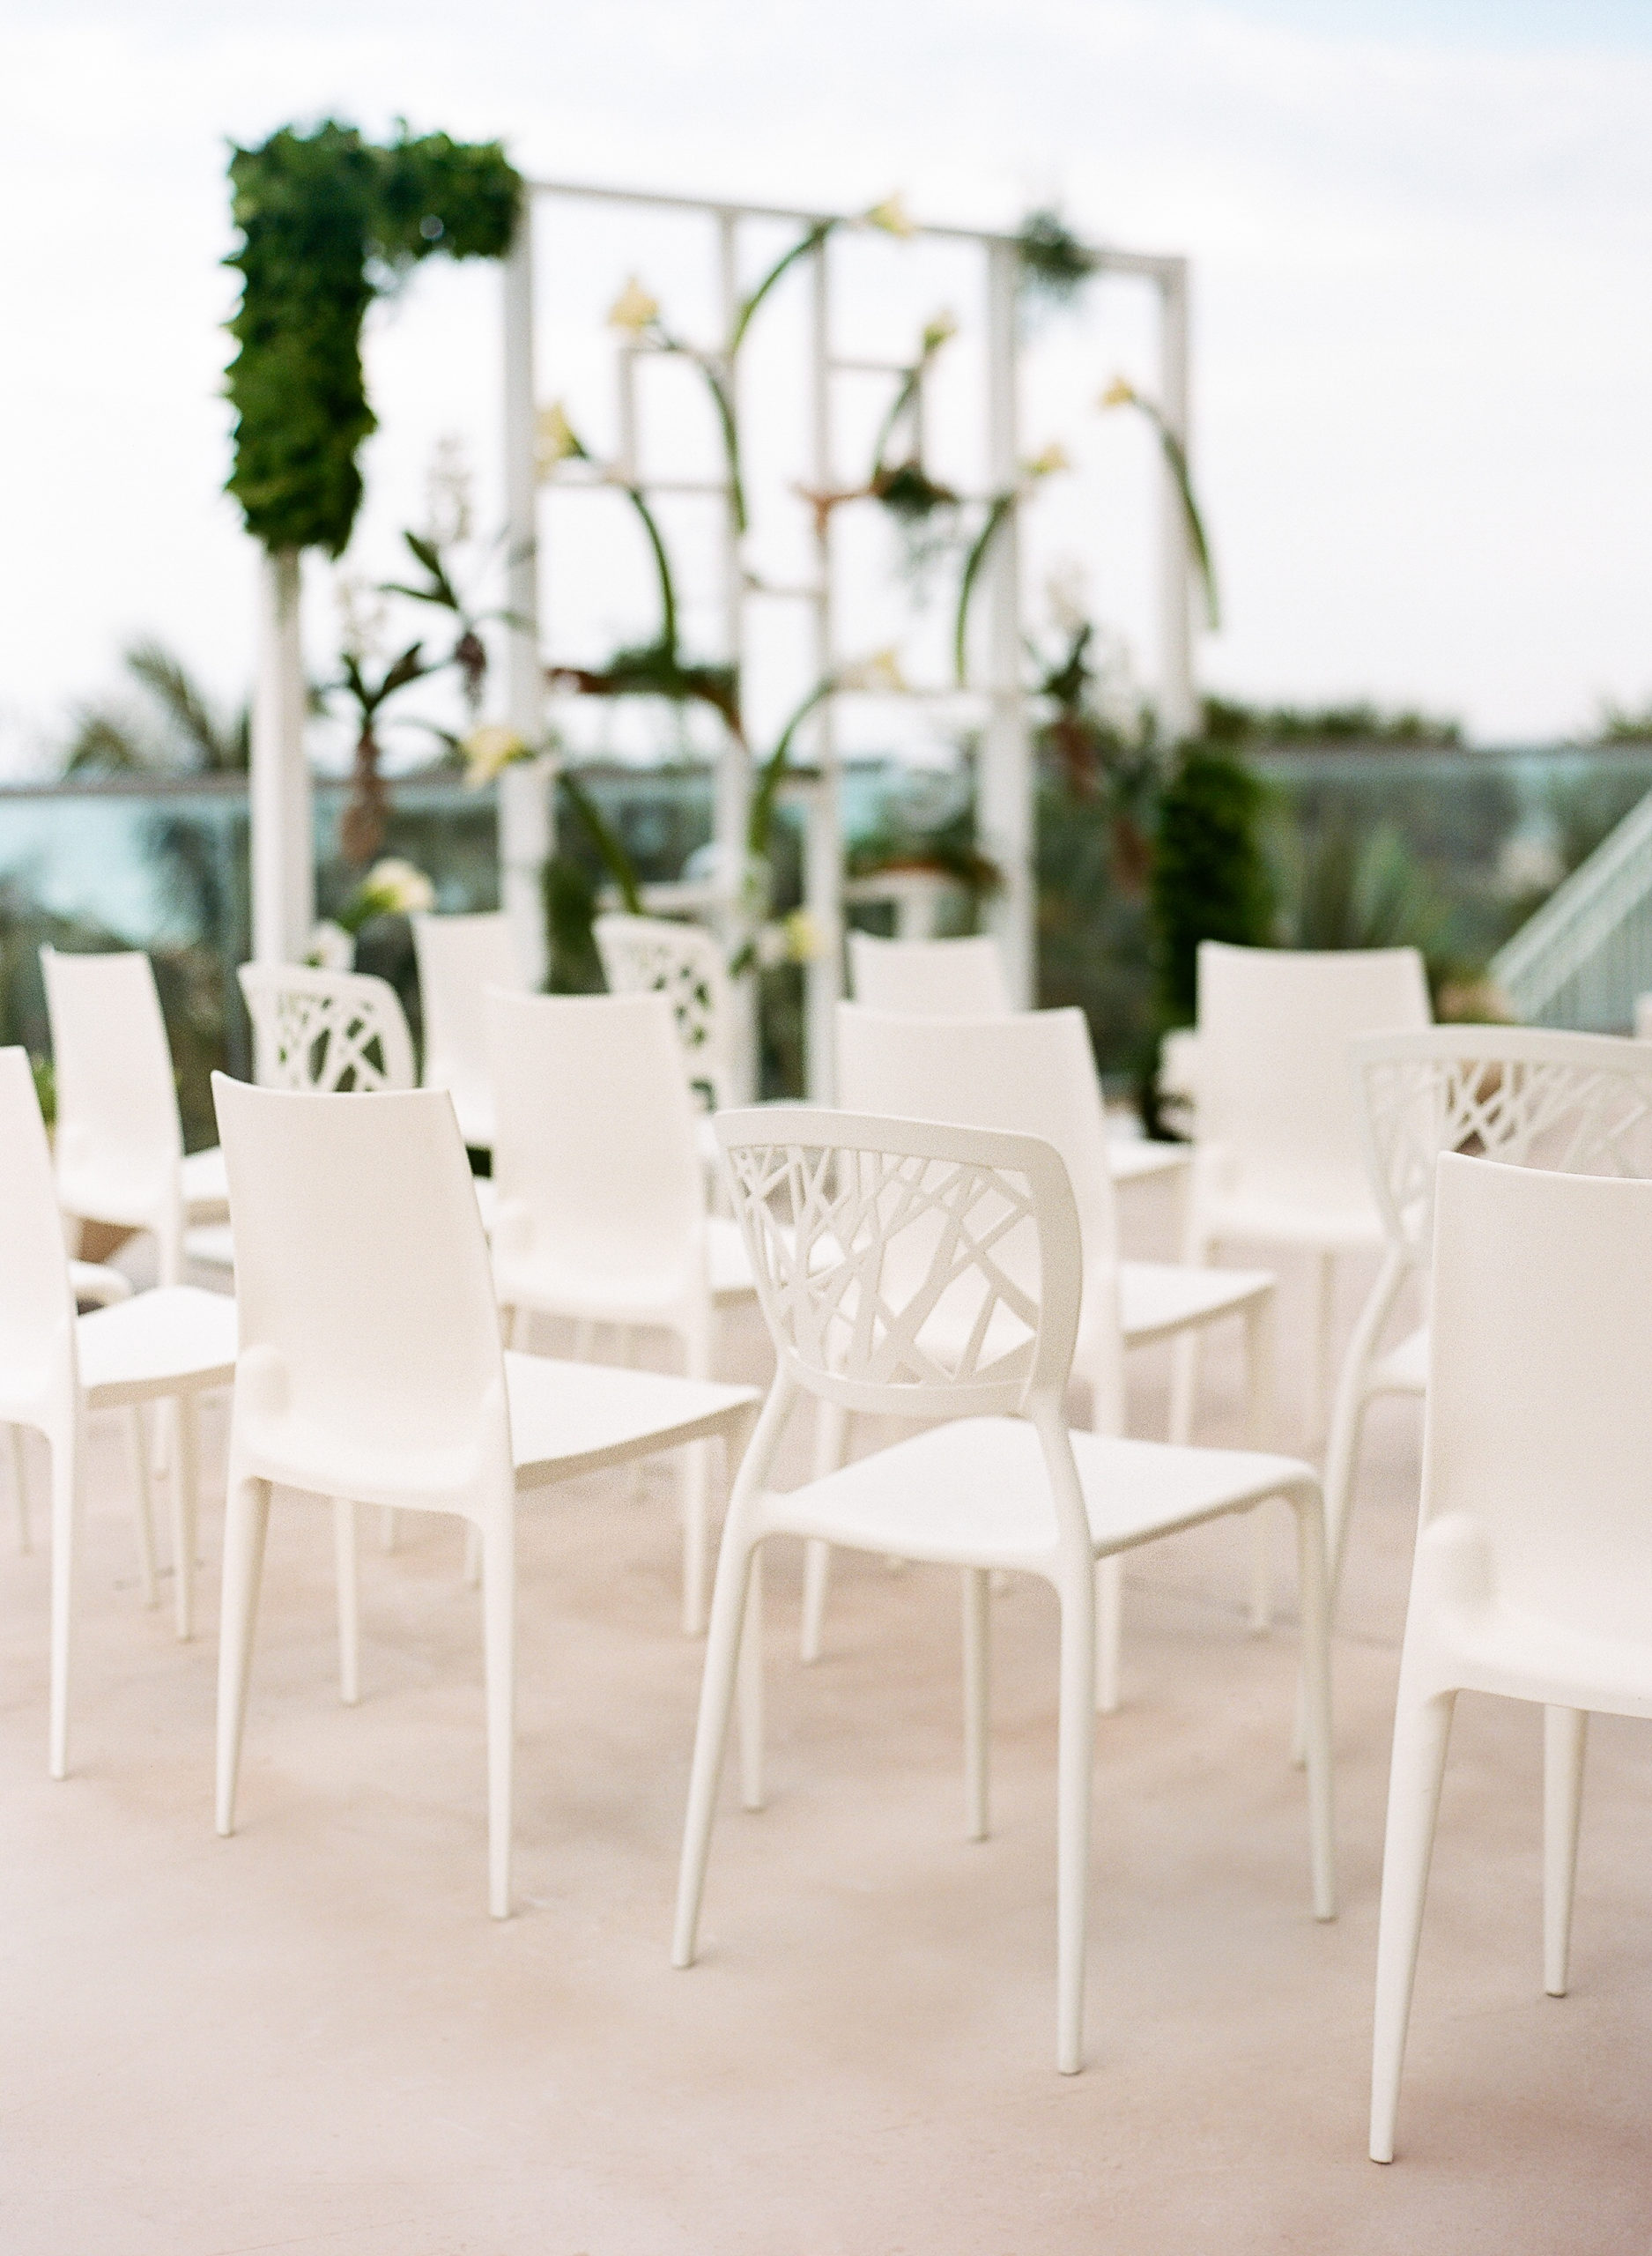 A Unique ceremony setup placed guest chairs around the couple to form an open circle encasing the couple and showcasing the custom ceremony structure with calla lilies, orchids, and greenery at the 1 Hotel South Beach